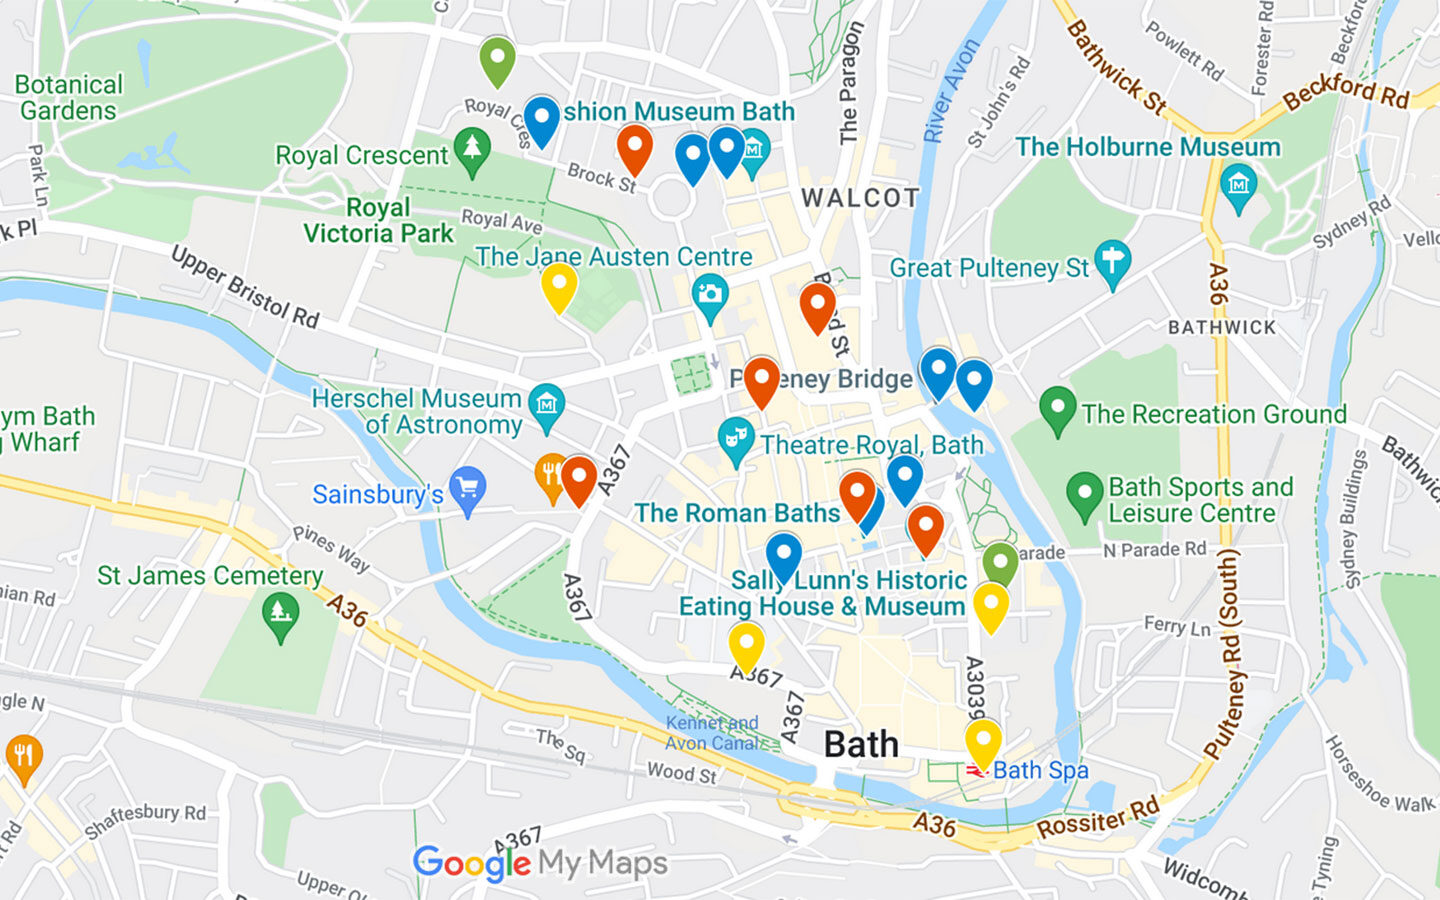 Map of things to do on a weekend in Bath